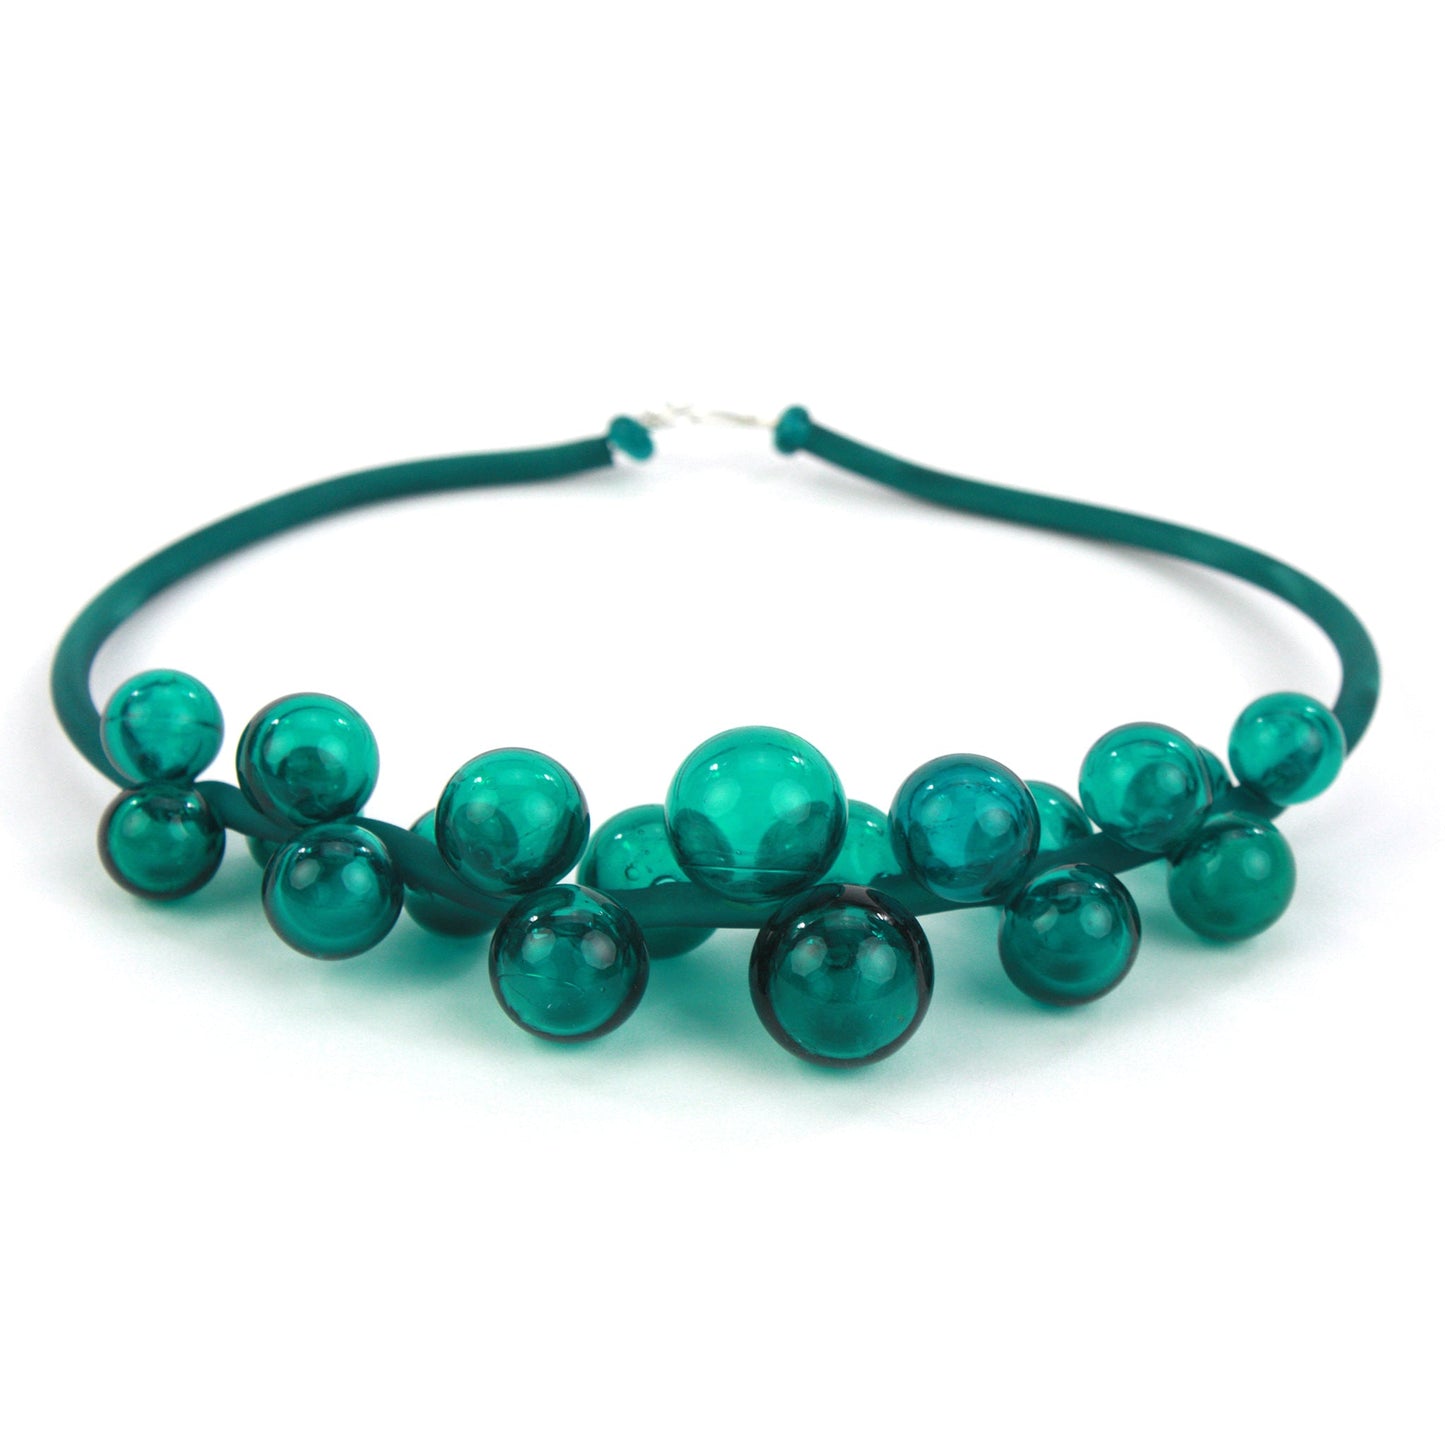 Chroma Bolla Necklace in Teal